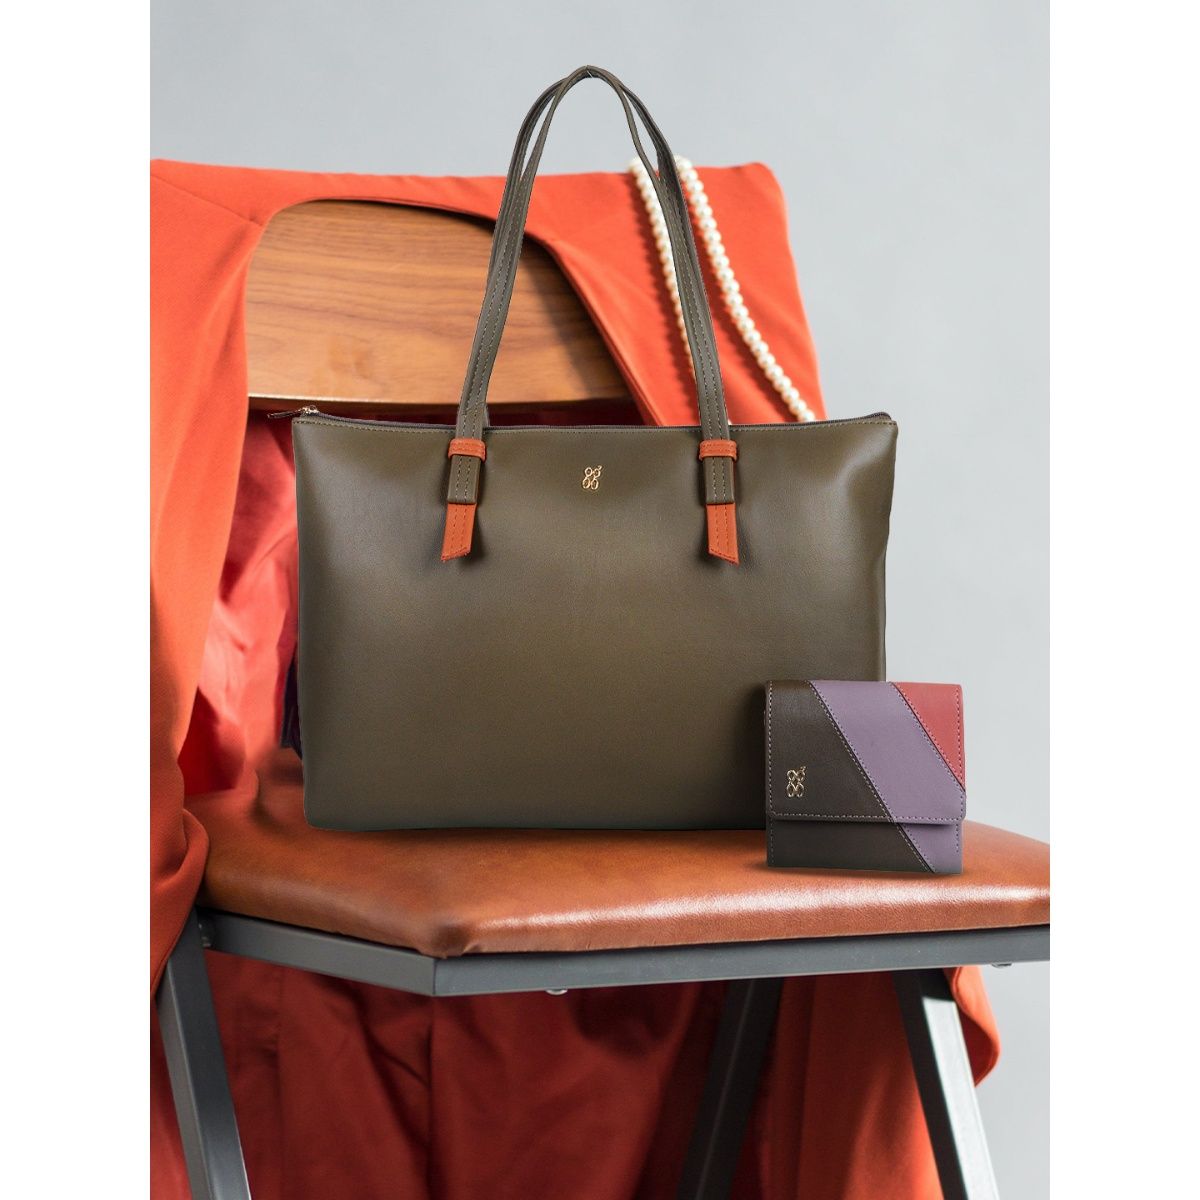 Buy Women's Baggit Tote Bag with Twin Handles Online | Centrepoint UAE